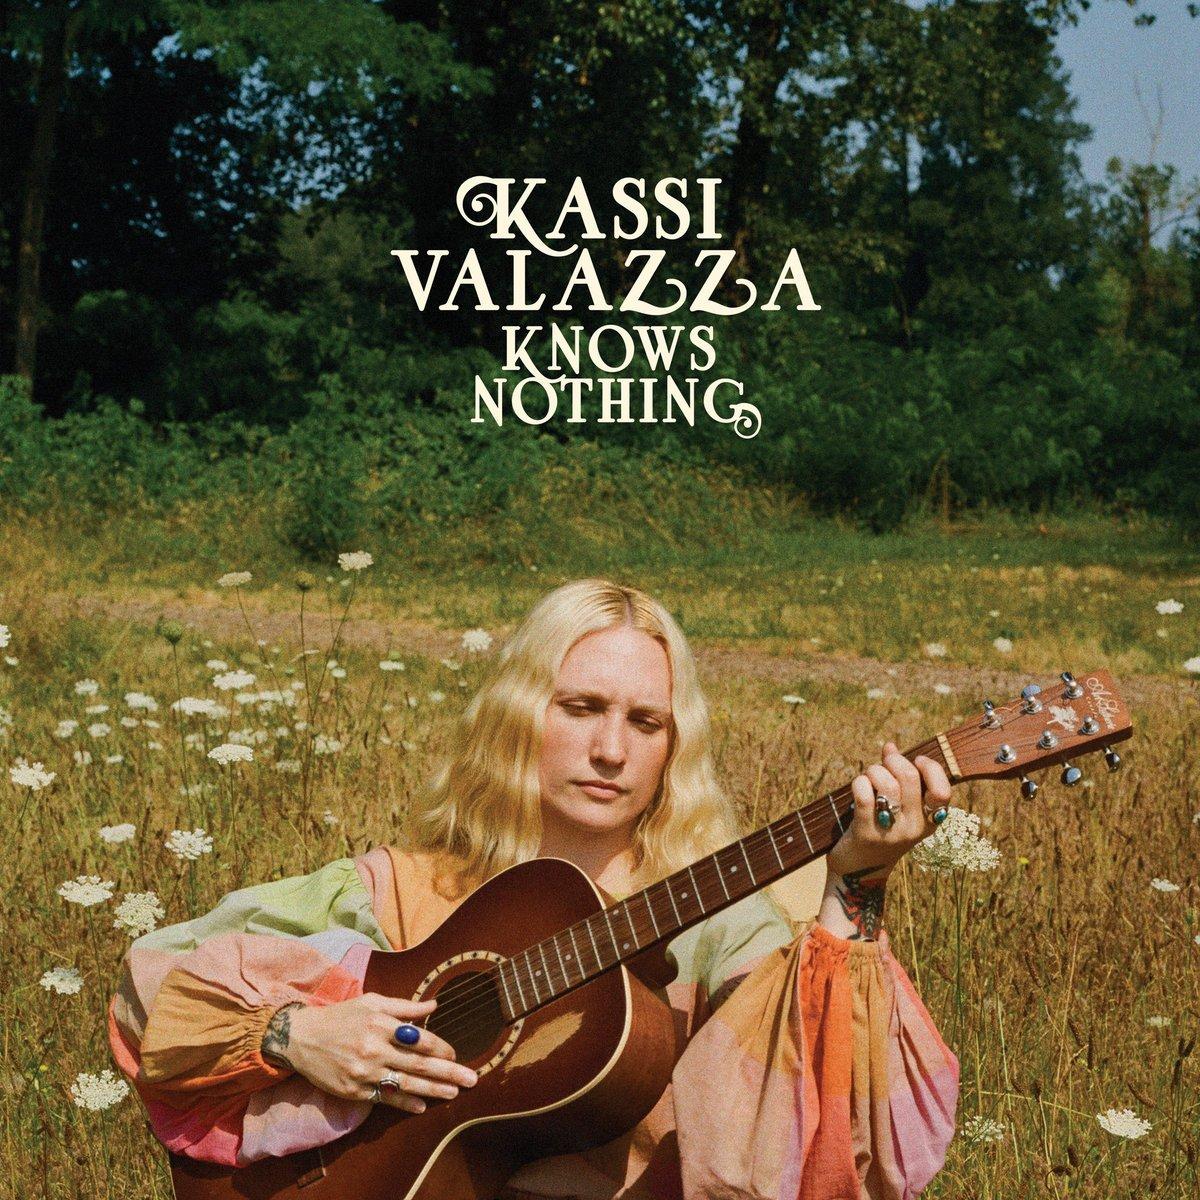 Album cover for Kassi Valazza Knows Nothing, depicting Kassi Valazza sitting in a field of wildflowers playing an acoustic guitar